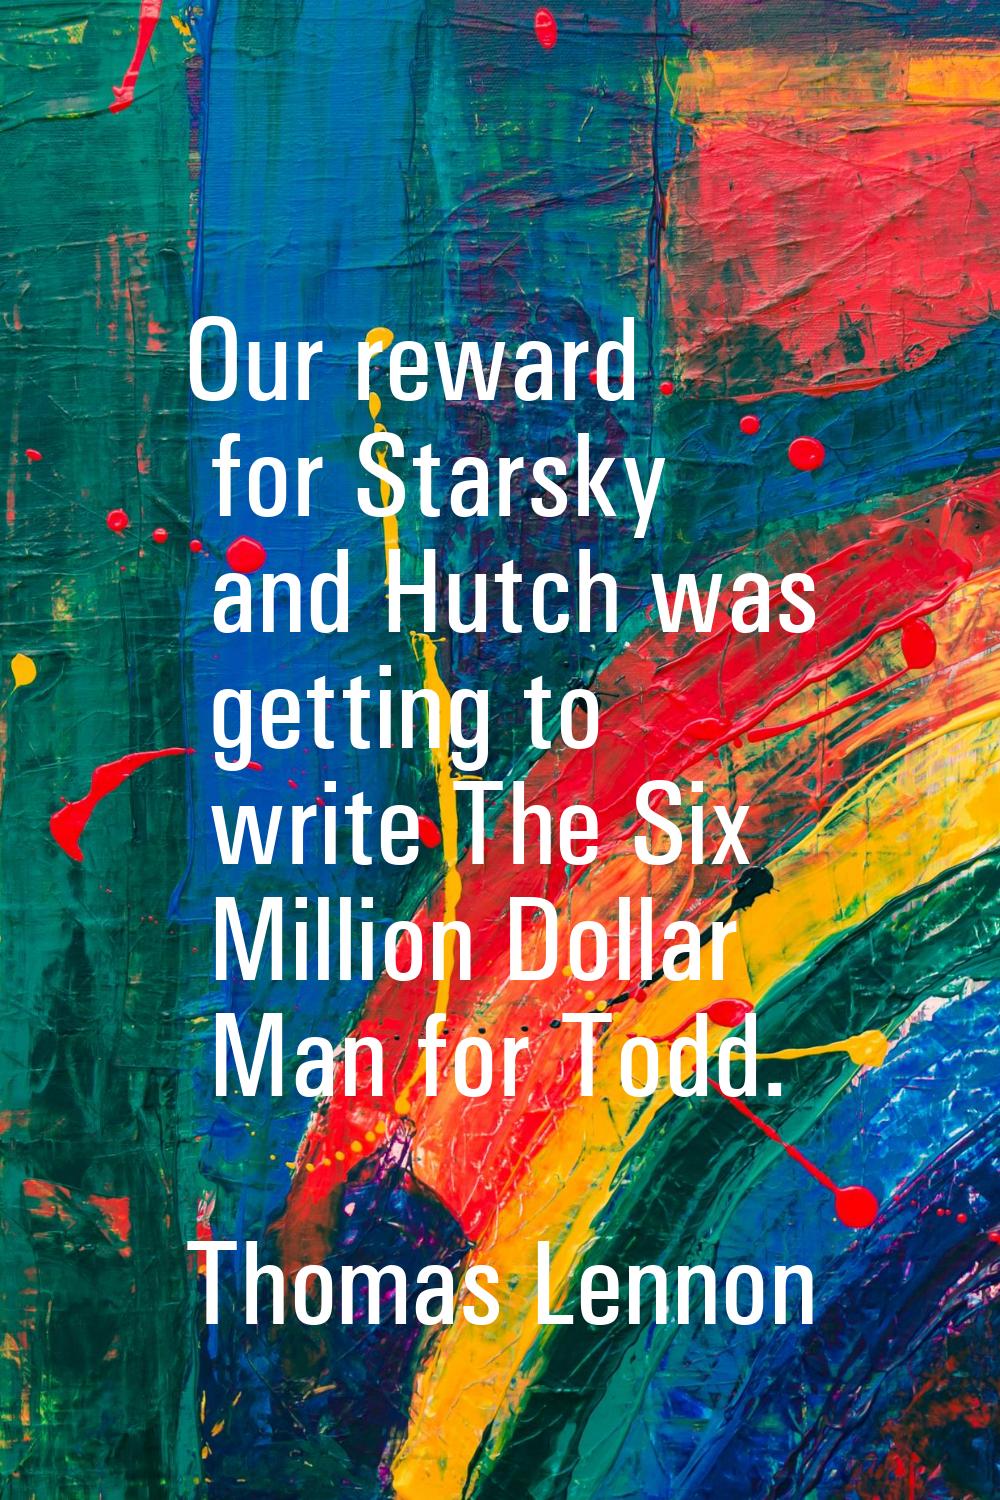 Our reward for Starsky and Hutch was getting to write The Six Million Dollar Man for Todd.